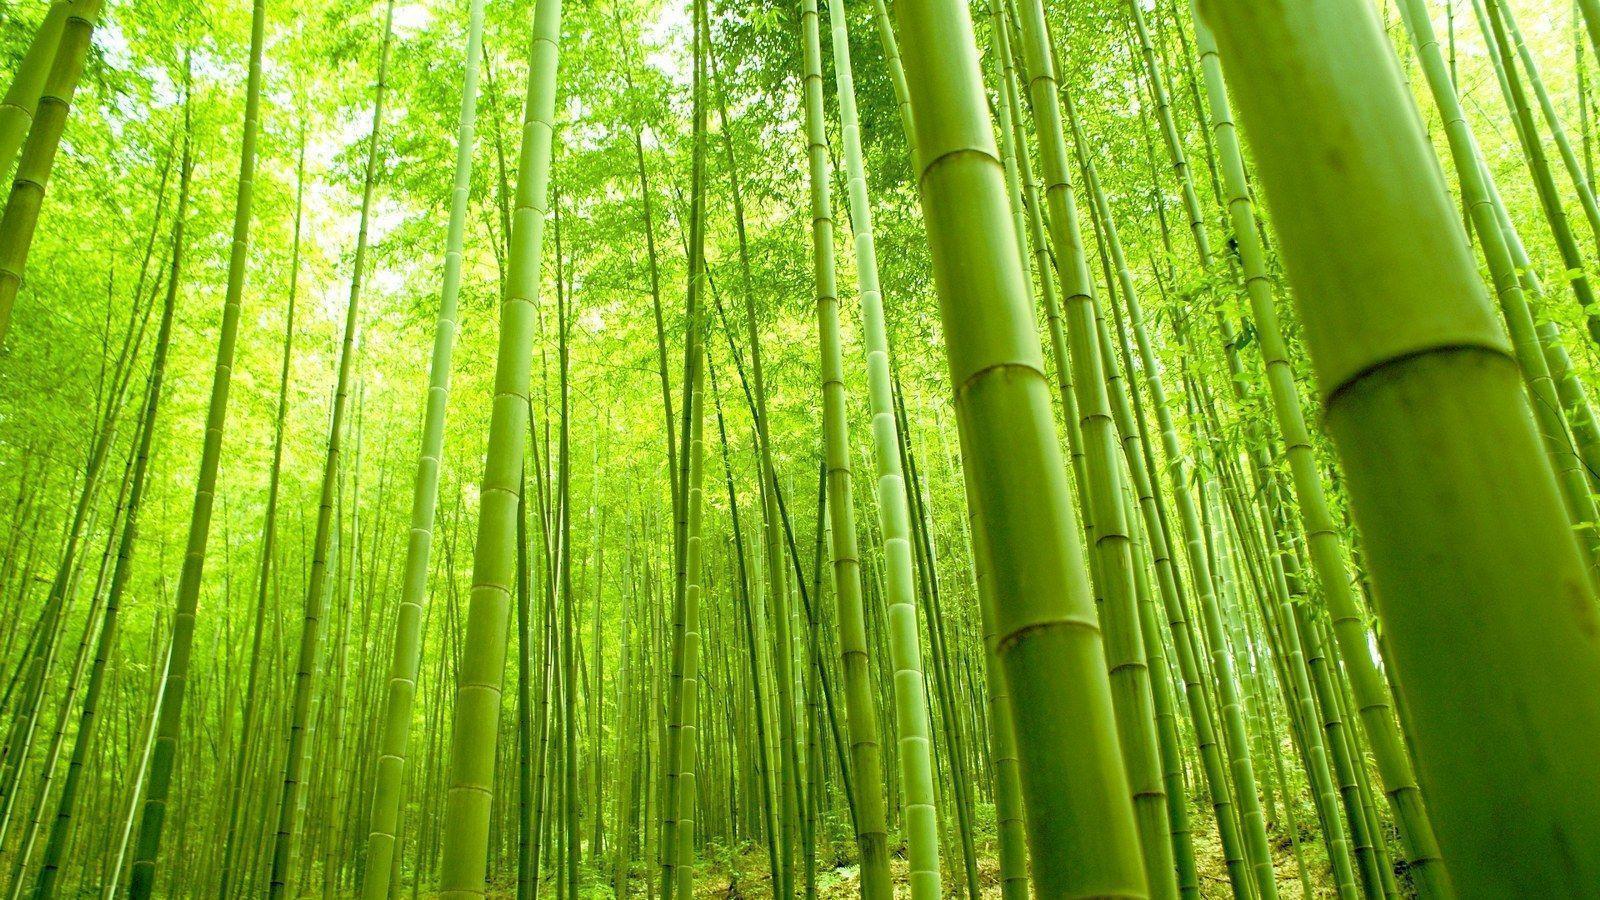 Green Bamboo In Forest